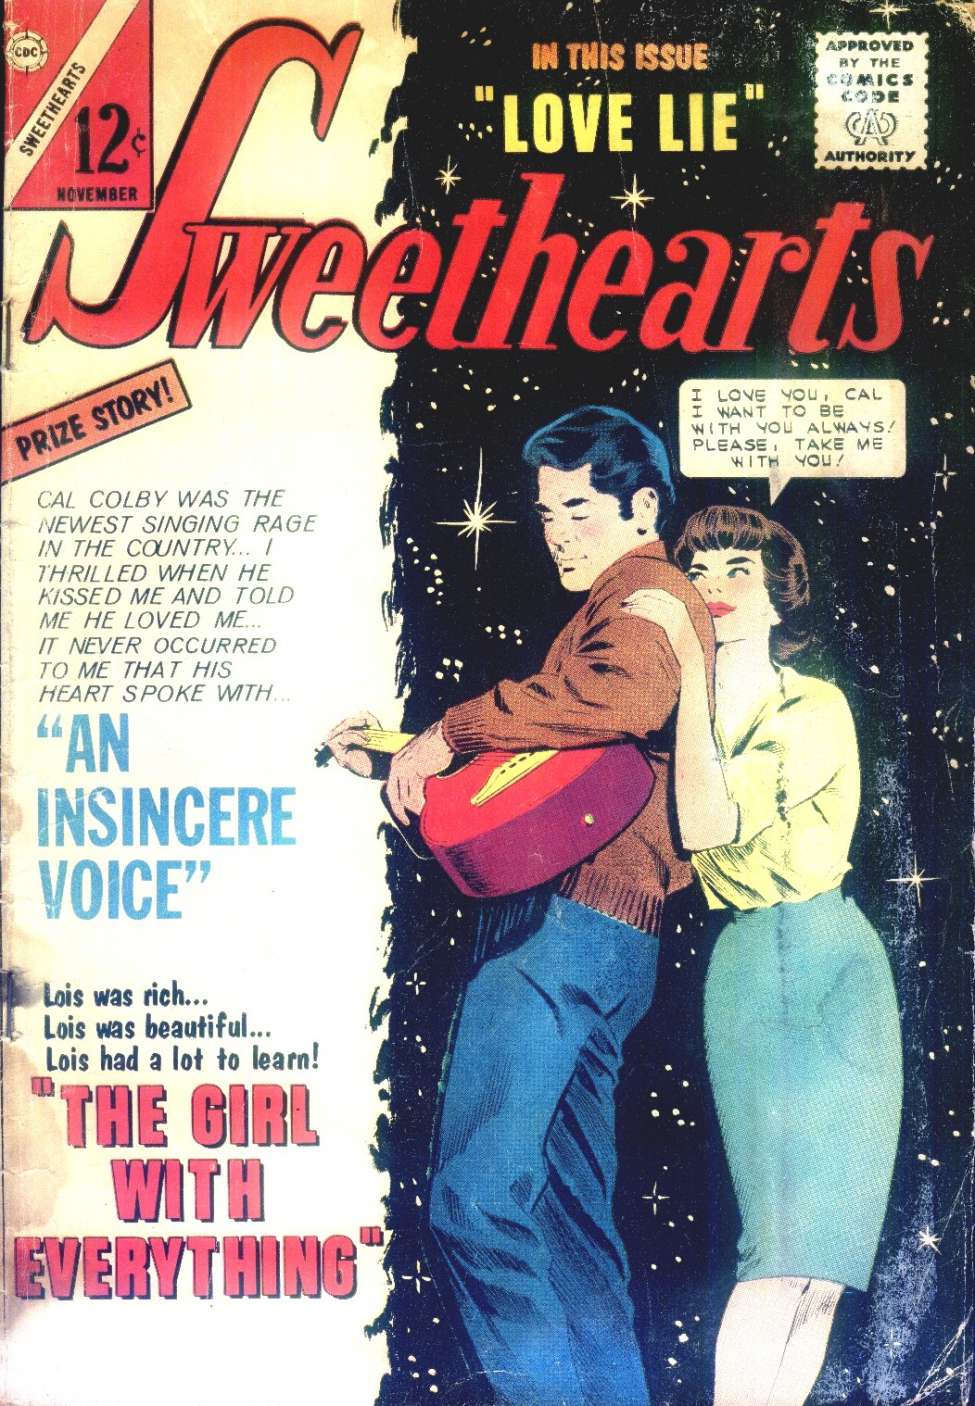 Book Cover For Sweethearts 74